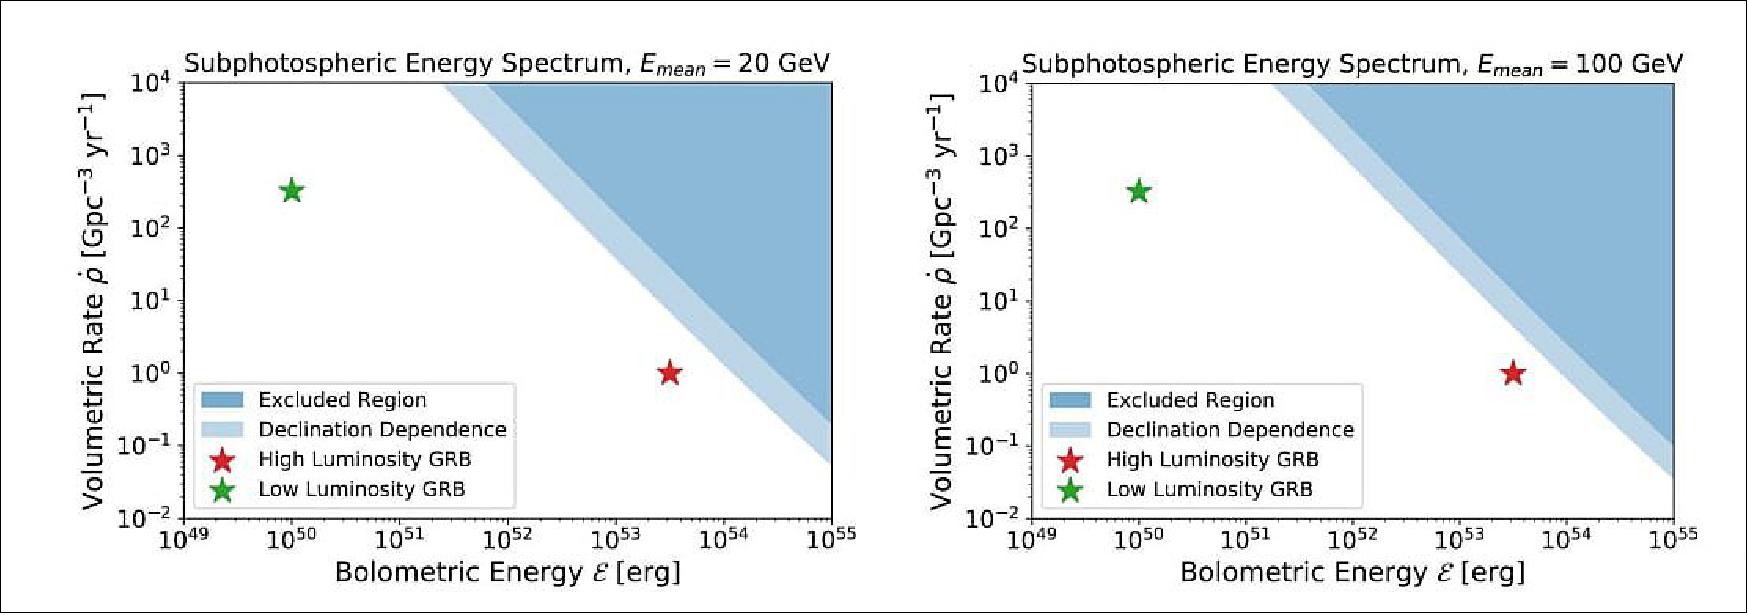 Figure 13: New upper bounds on the volumetric rate of transient neutrino point sources as a function of their bolometric neutrino energy that were determined from this research. This is compared to models for high- and low-luminosity gamma-ray bursts (see Murase et al. 2013; Liang et al. 2007). The light blue bands show the declination dependencies of the upper bounds. The left panel shows results based on sources with a mean energy of 20 GeV, while the right panel is based on a mean energy of 100 GeV (image credit: IceCube Collaboration)